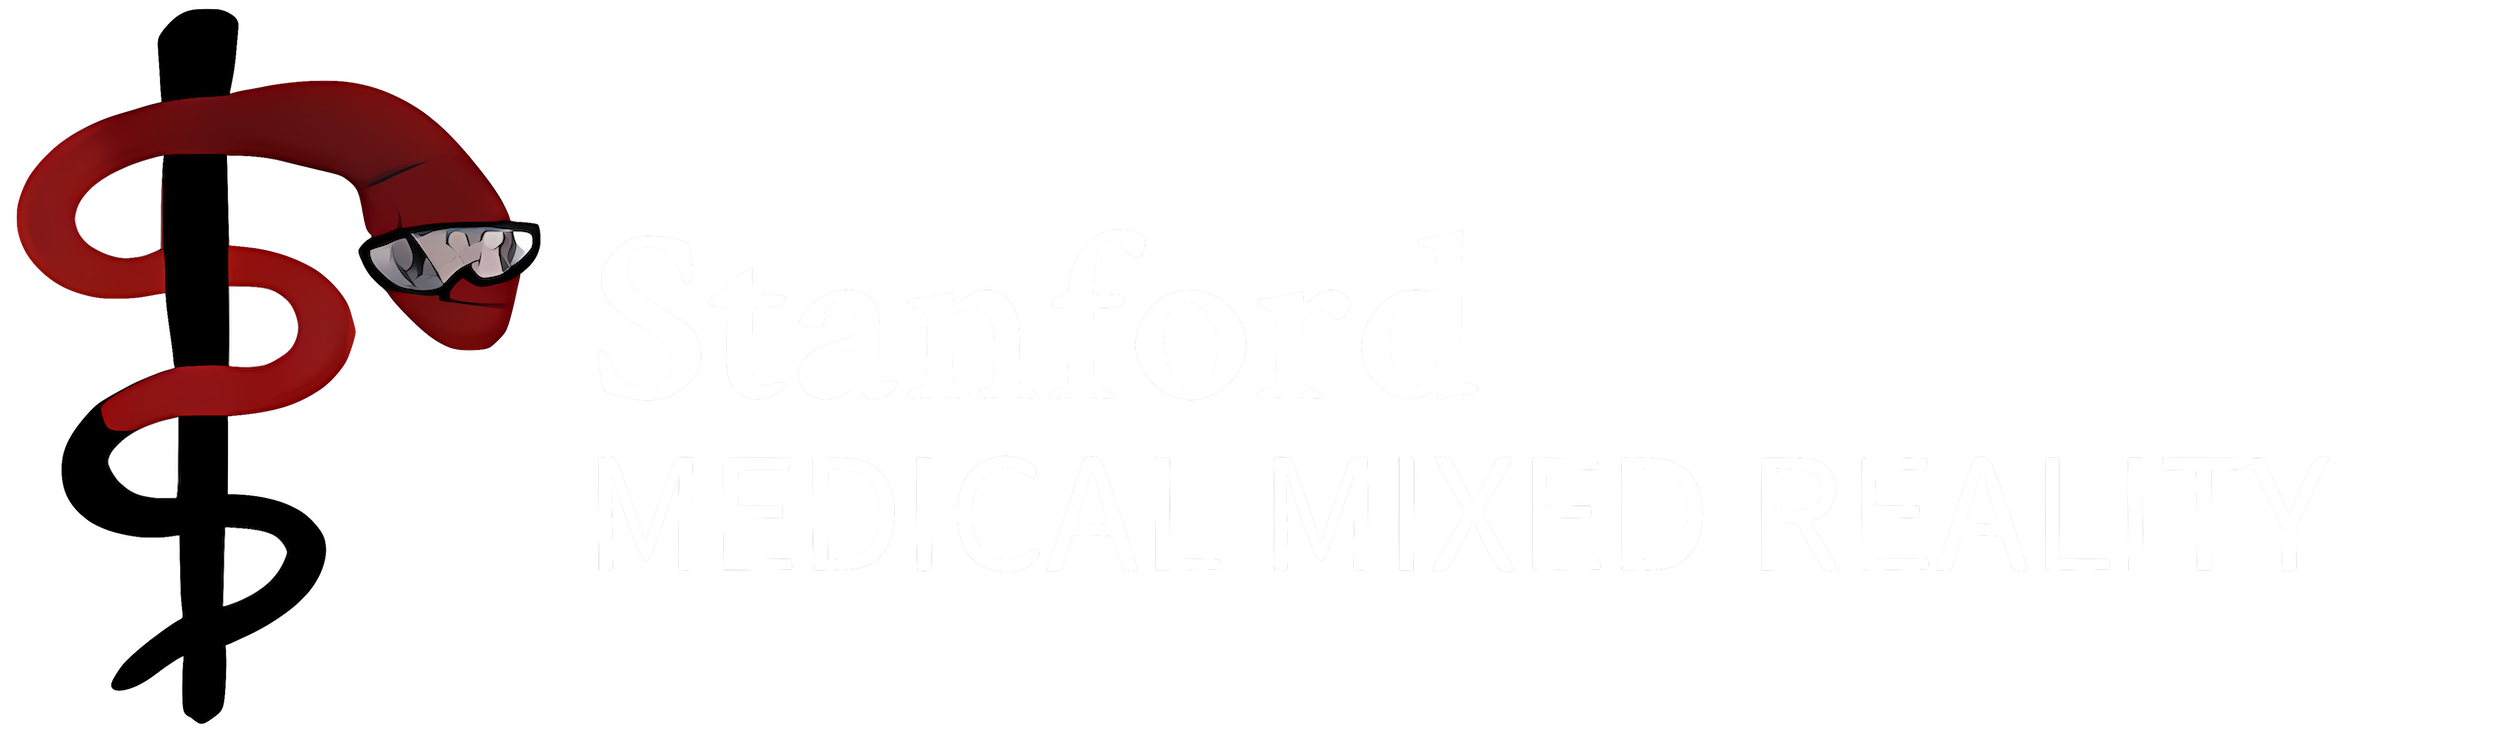 Medical Mixed Reality, Stanford University